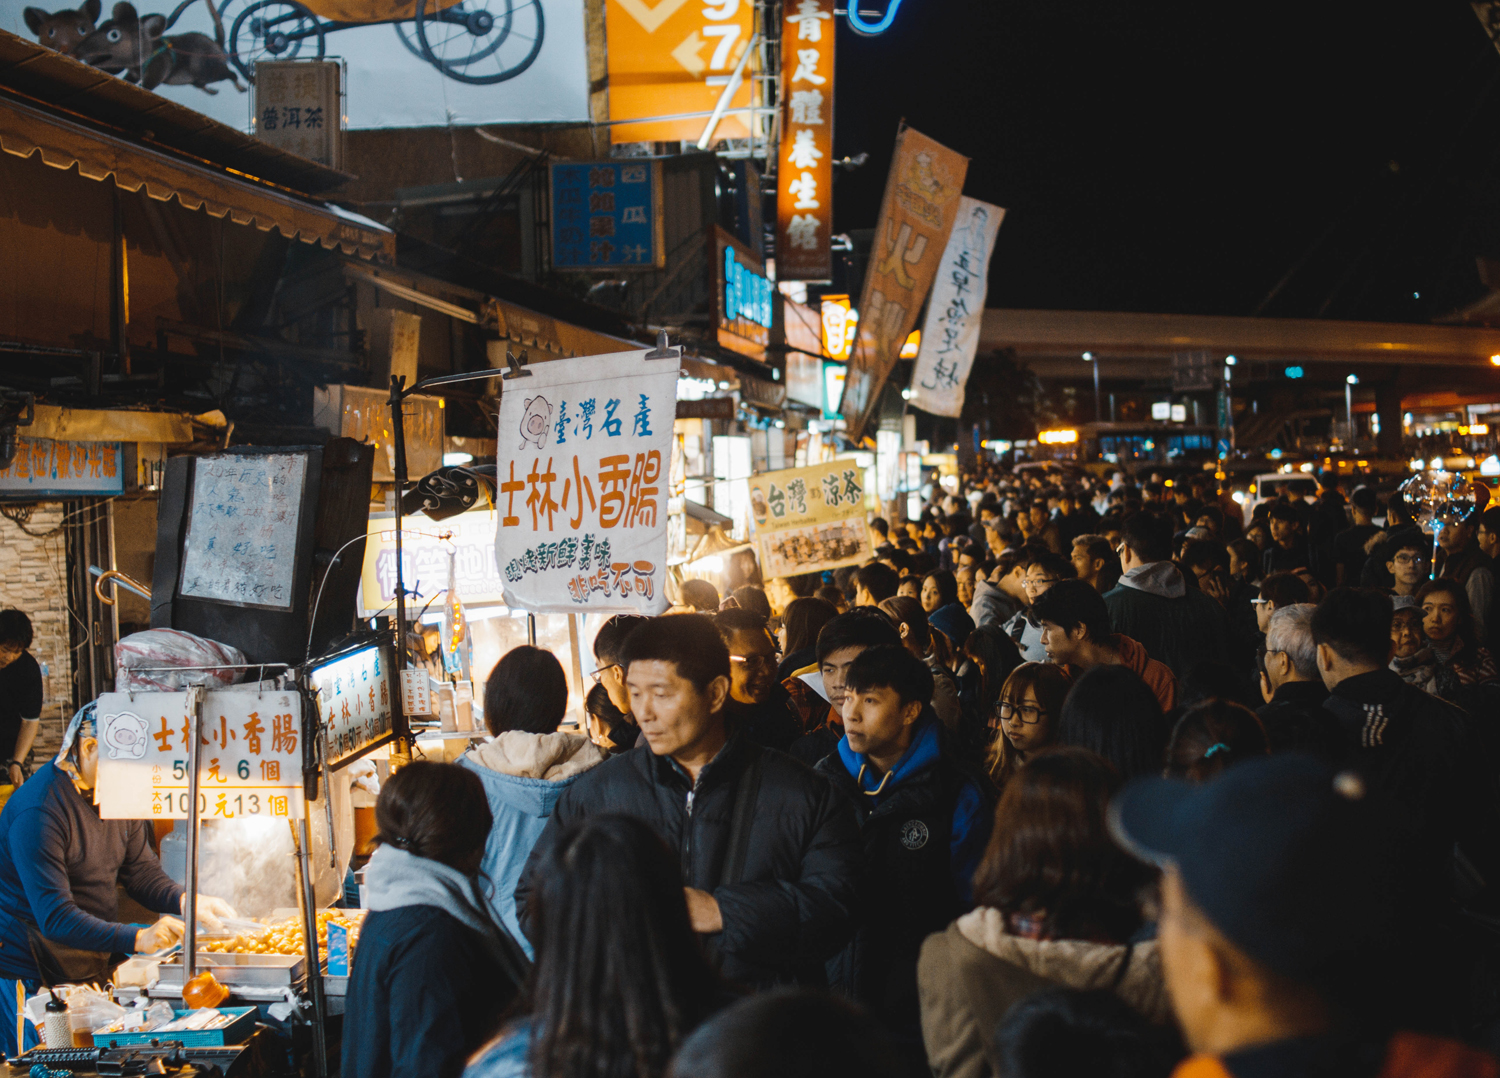 People milling around at a night market